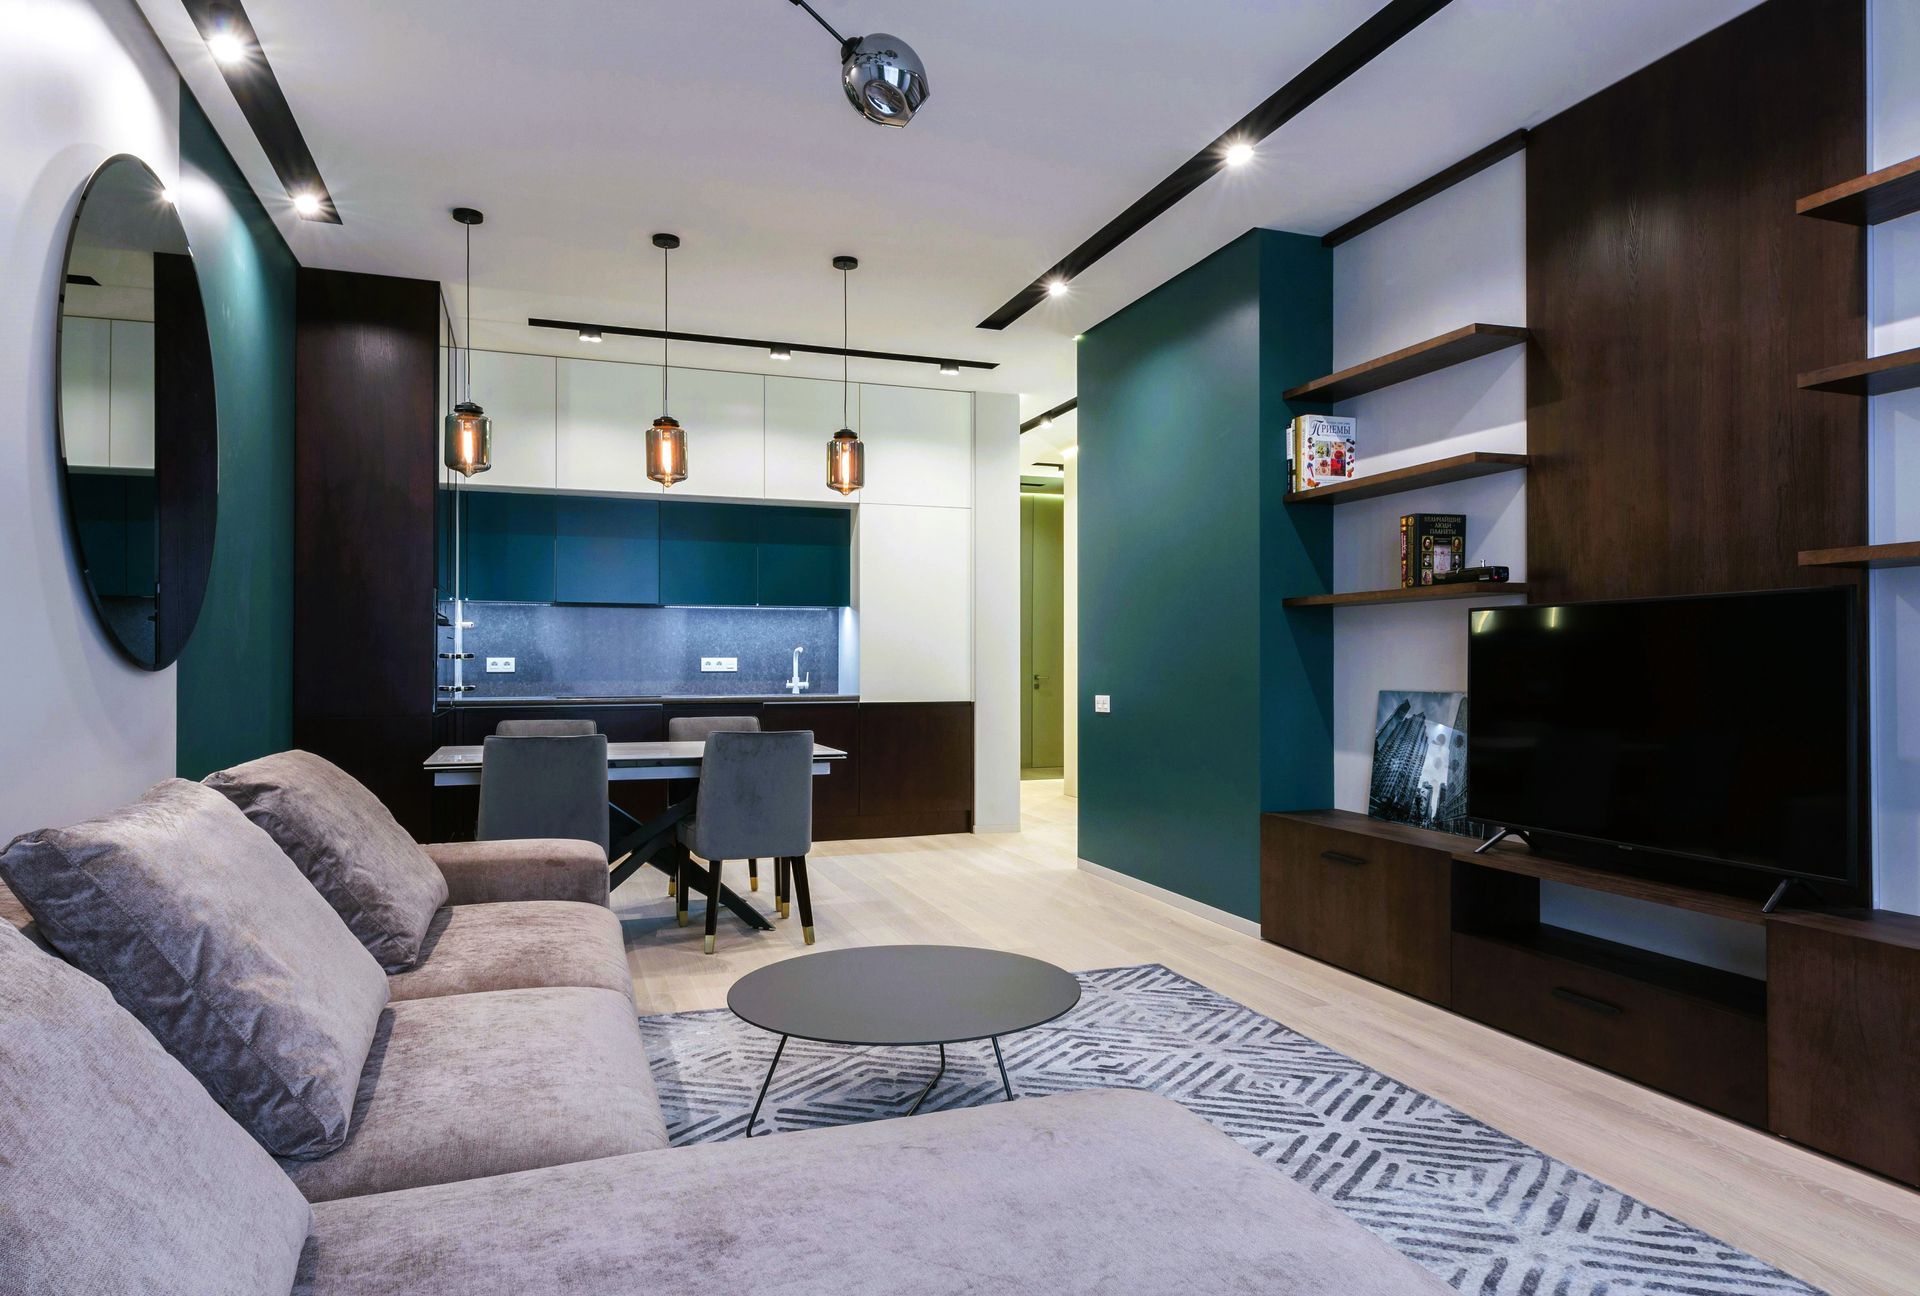 Basement living room with midnight green accent wall, couch, and wooden furniture near kitchen